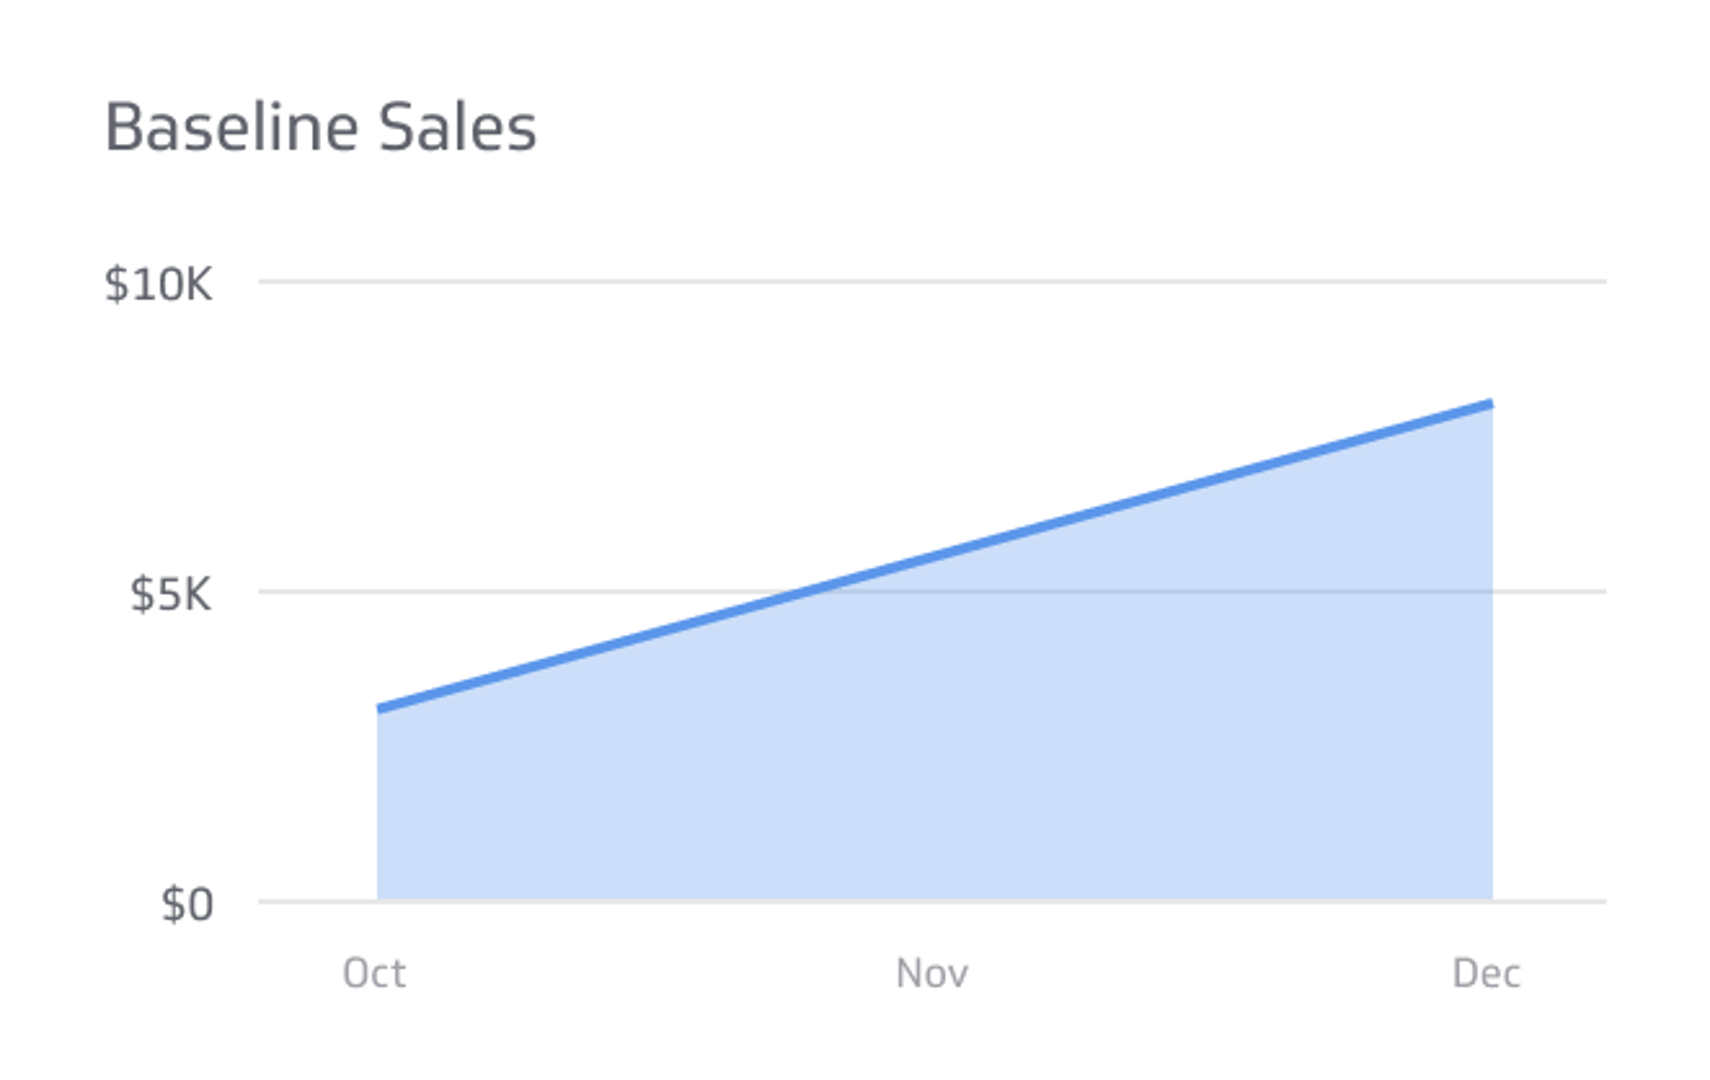 Related KPI Examples - Baseline Sales Metric